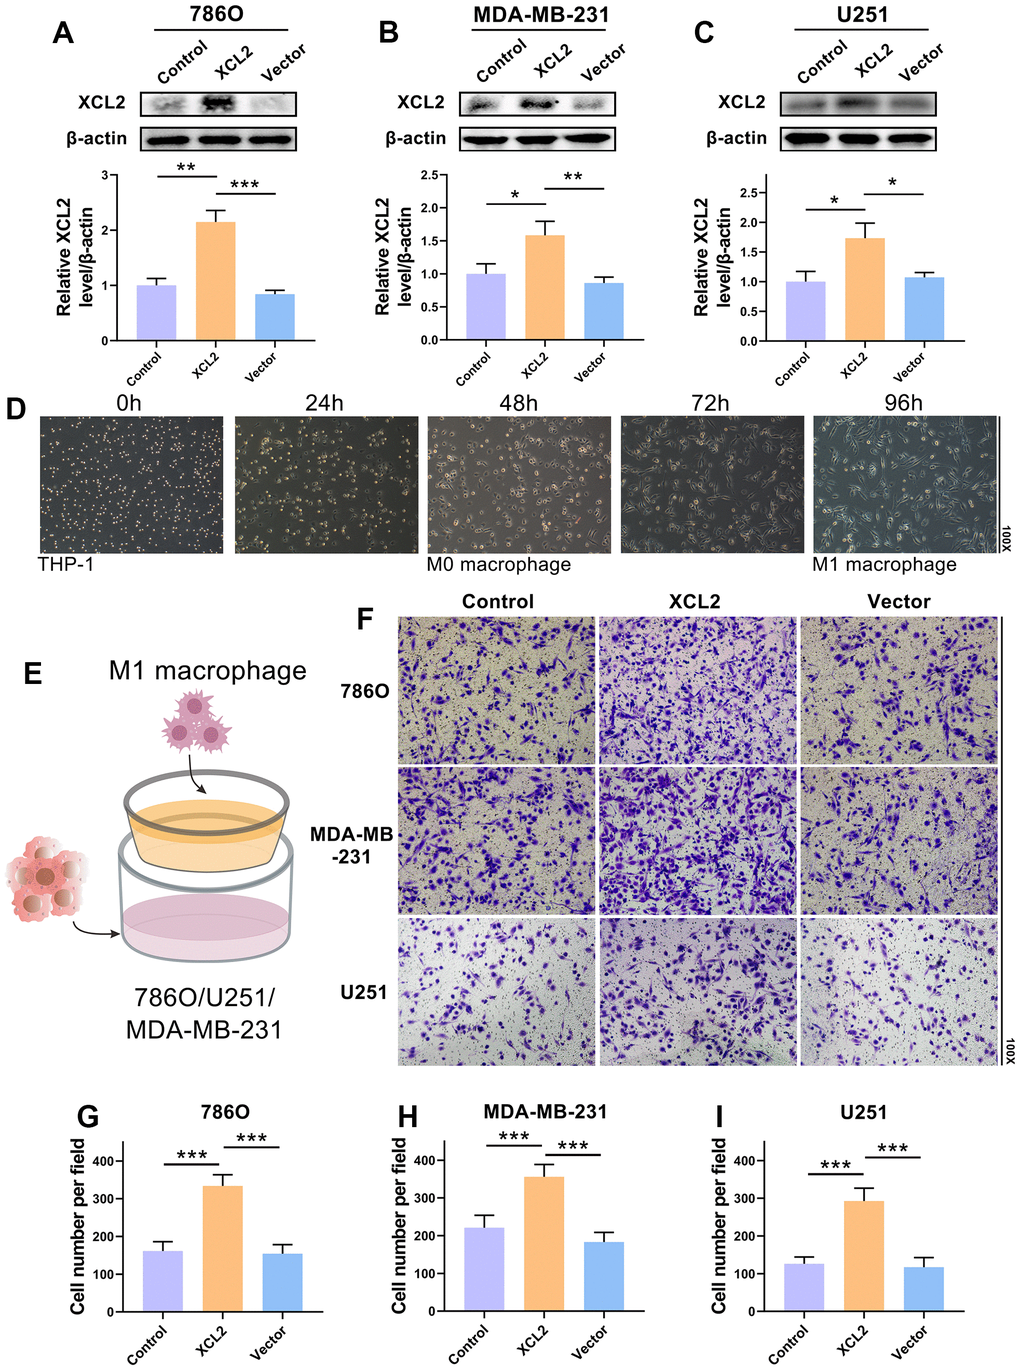 M1 macrophage migration is mediated by XCL2. (A–C) The transduction outcomes of XCL2 in 786O, MDA-MB-231, and U251 are confirmed using western blotting. (D) The M1 macrophages induction procedure and morphology. (E) The schematic design shows the coculture of 786O, MDA-MB-231, or U251 cells with M1 macrophages. (F–I) The movement of M1 macrophages in coculture with 786O, MDA-MB-231, and U251 cells that have been XCL2-OE and XCL-NC transfected. The magnification under the microscope is shown as marked in the figure. *P 